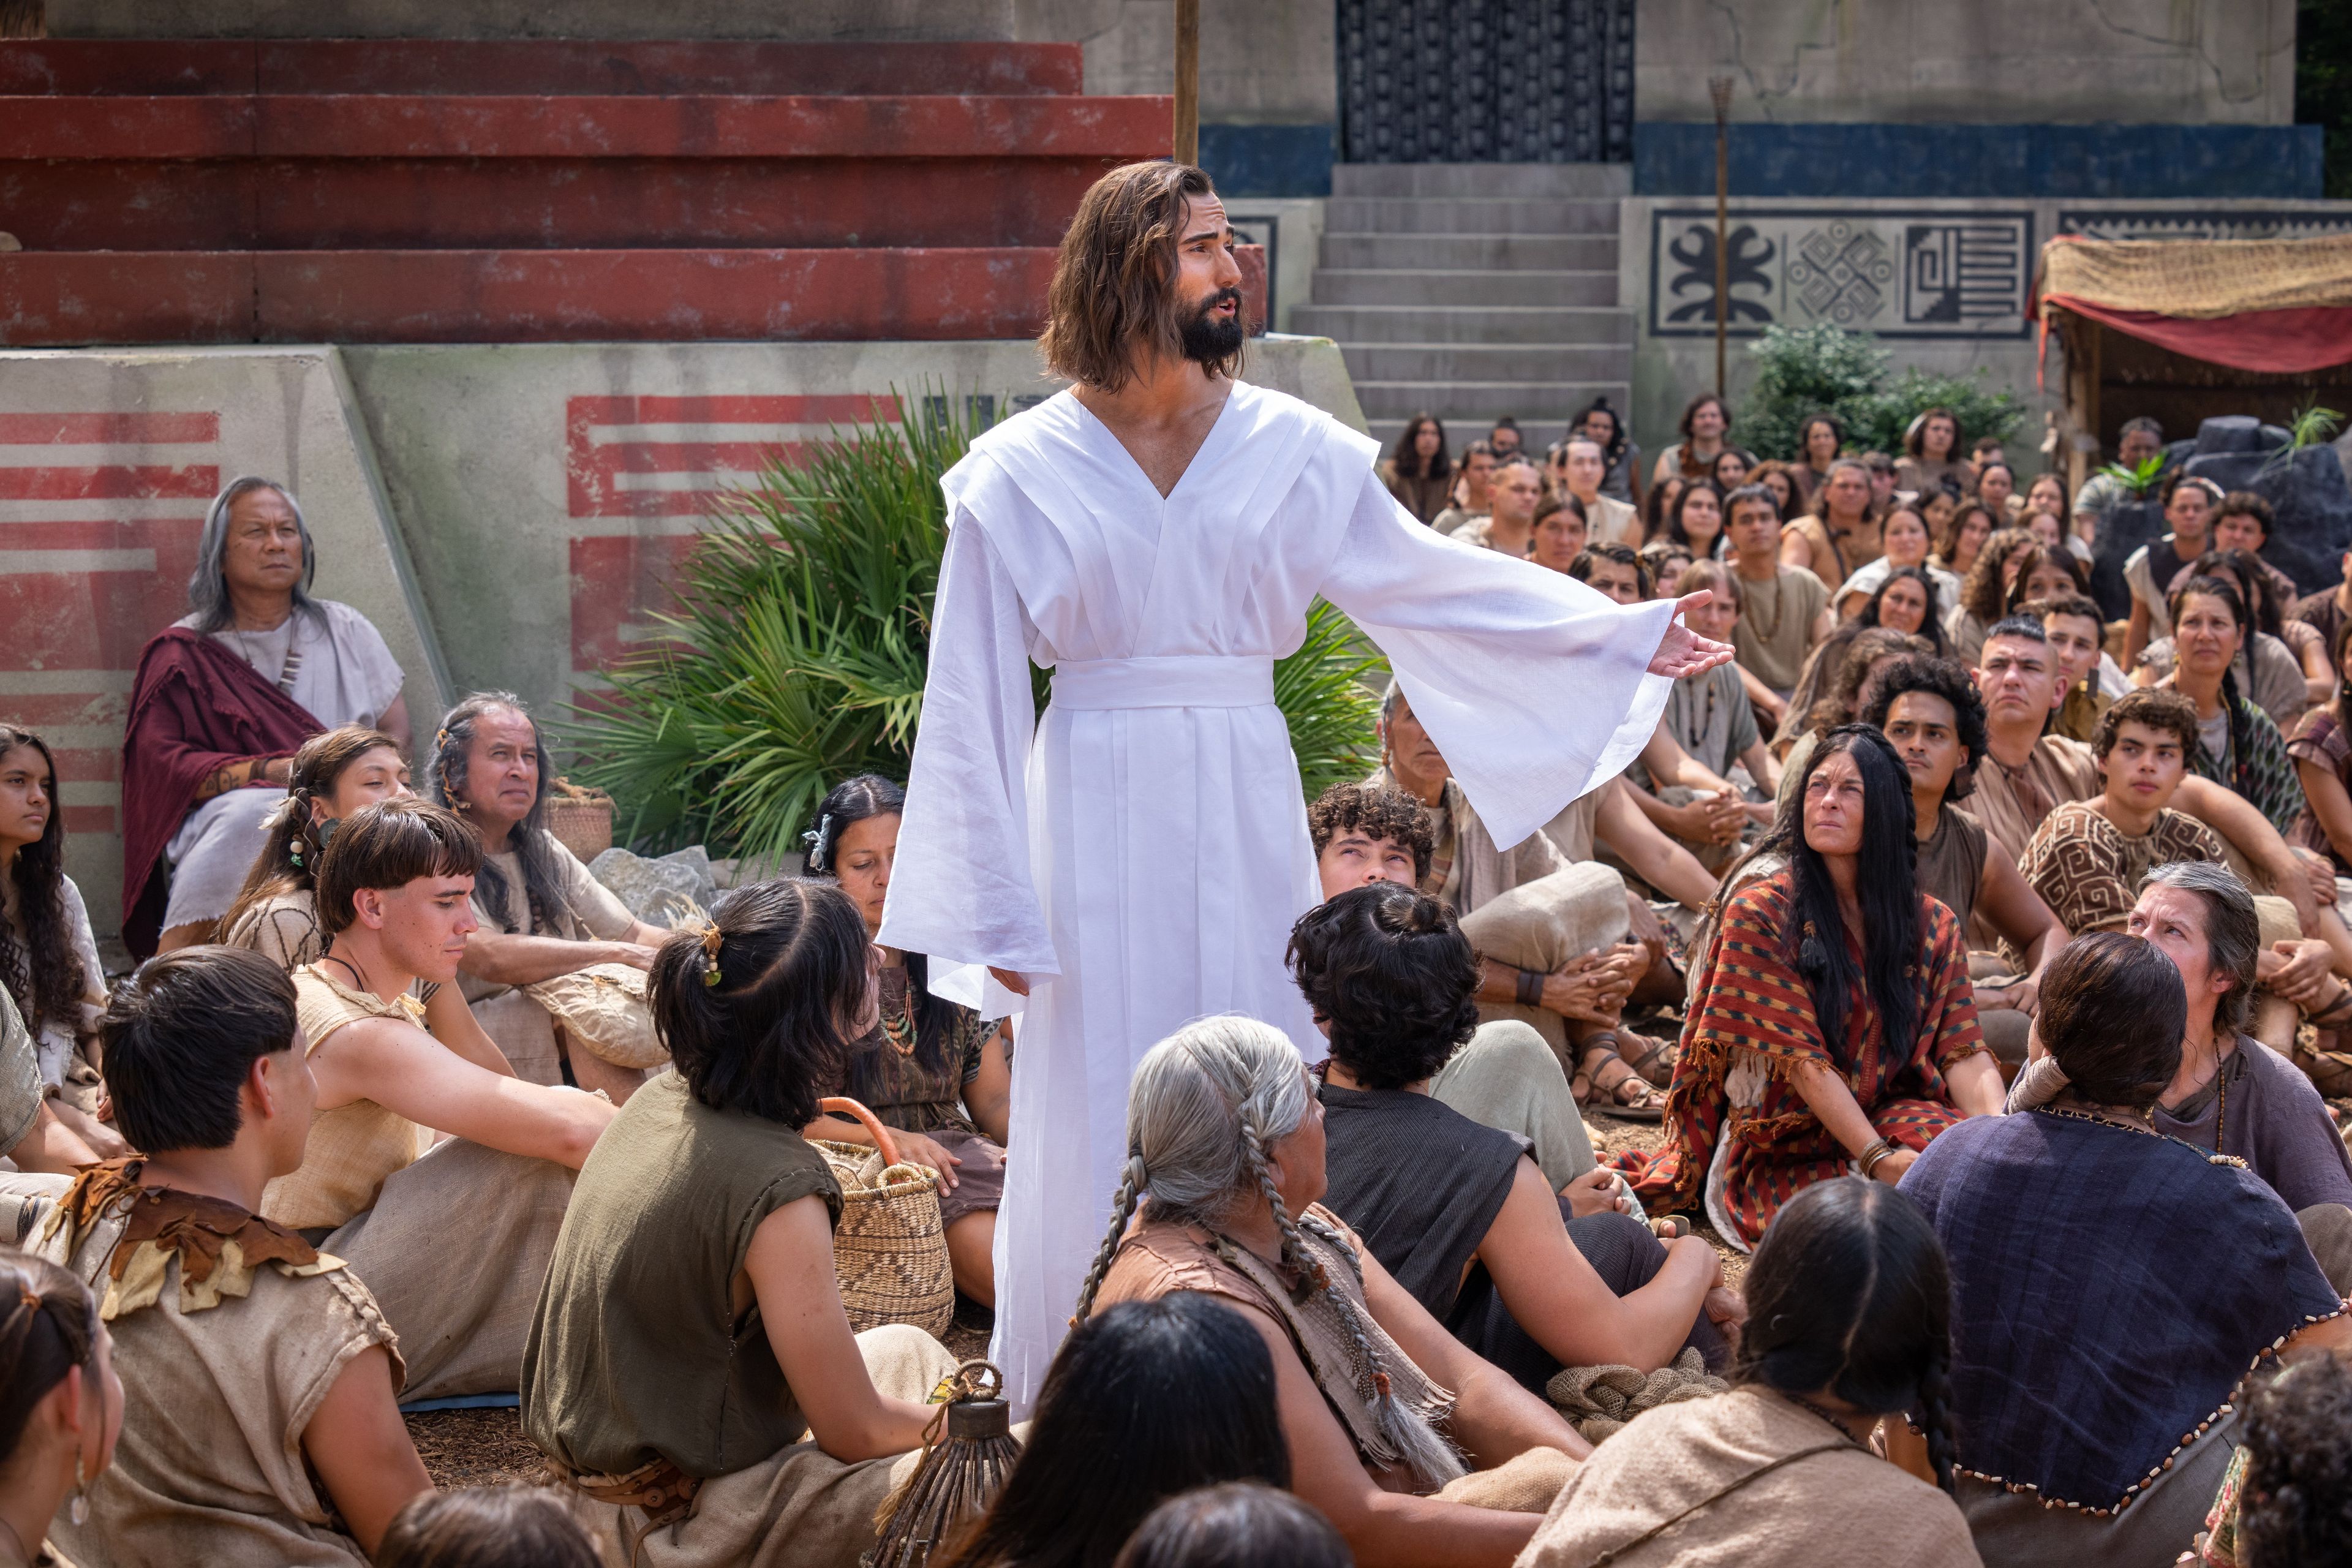 Jesus Christ teaches the higher law to Nephites outside of the Bountiful Temple.